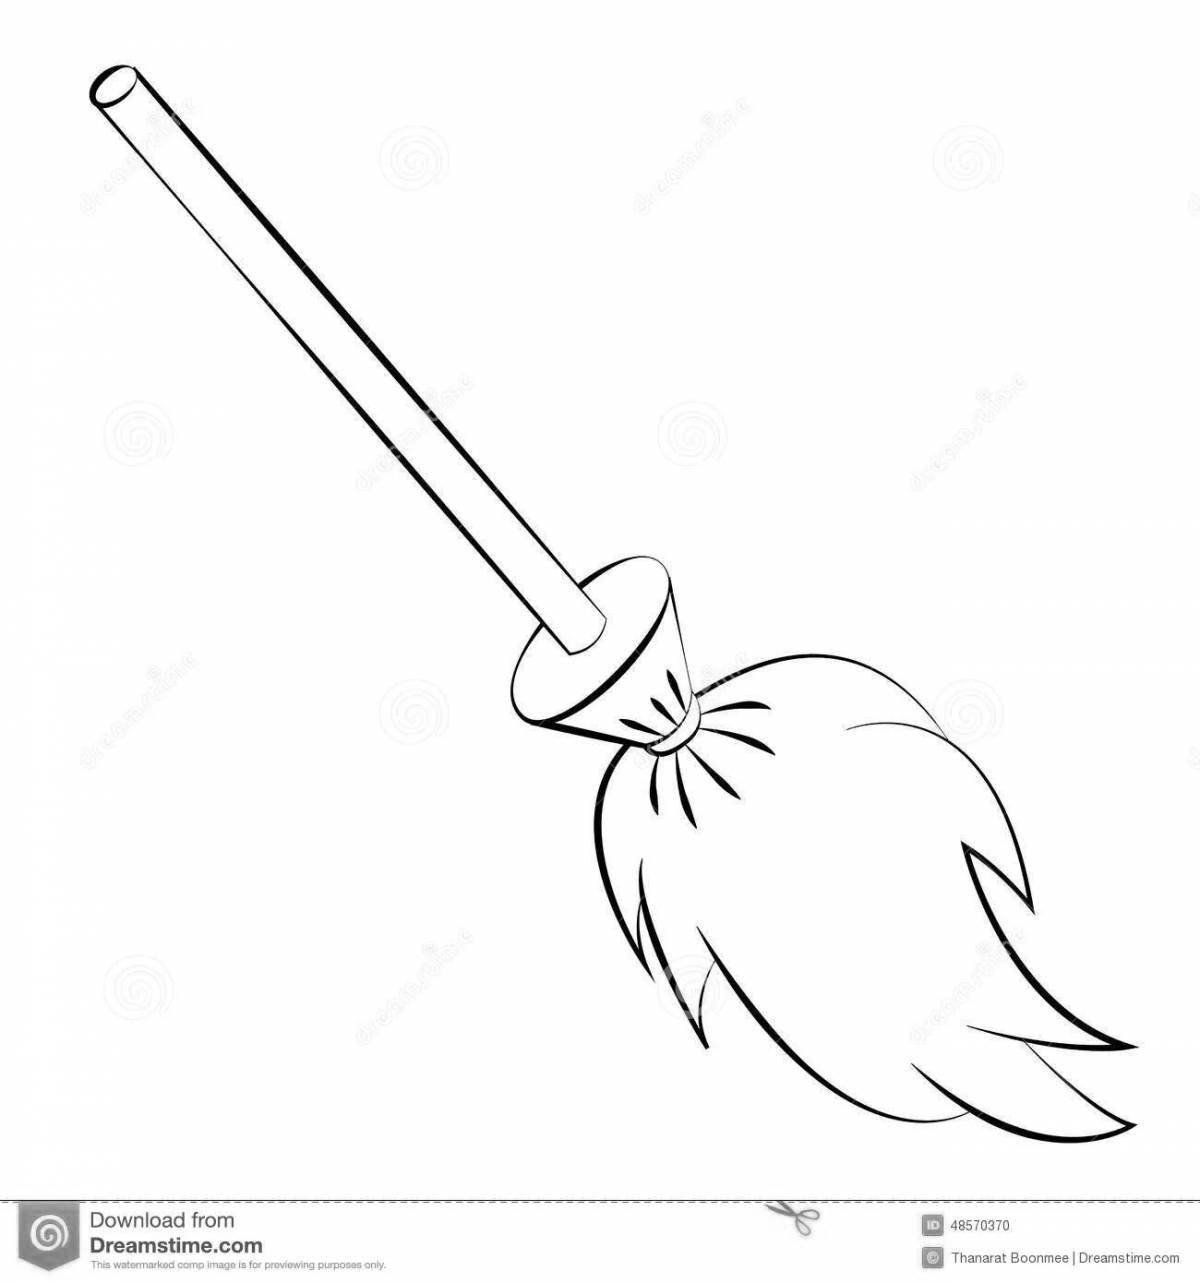 Awesome broom coloring pages for kids